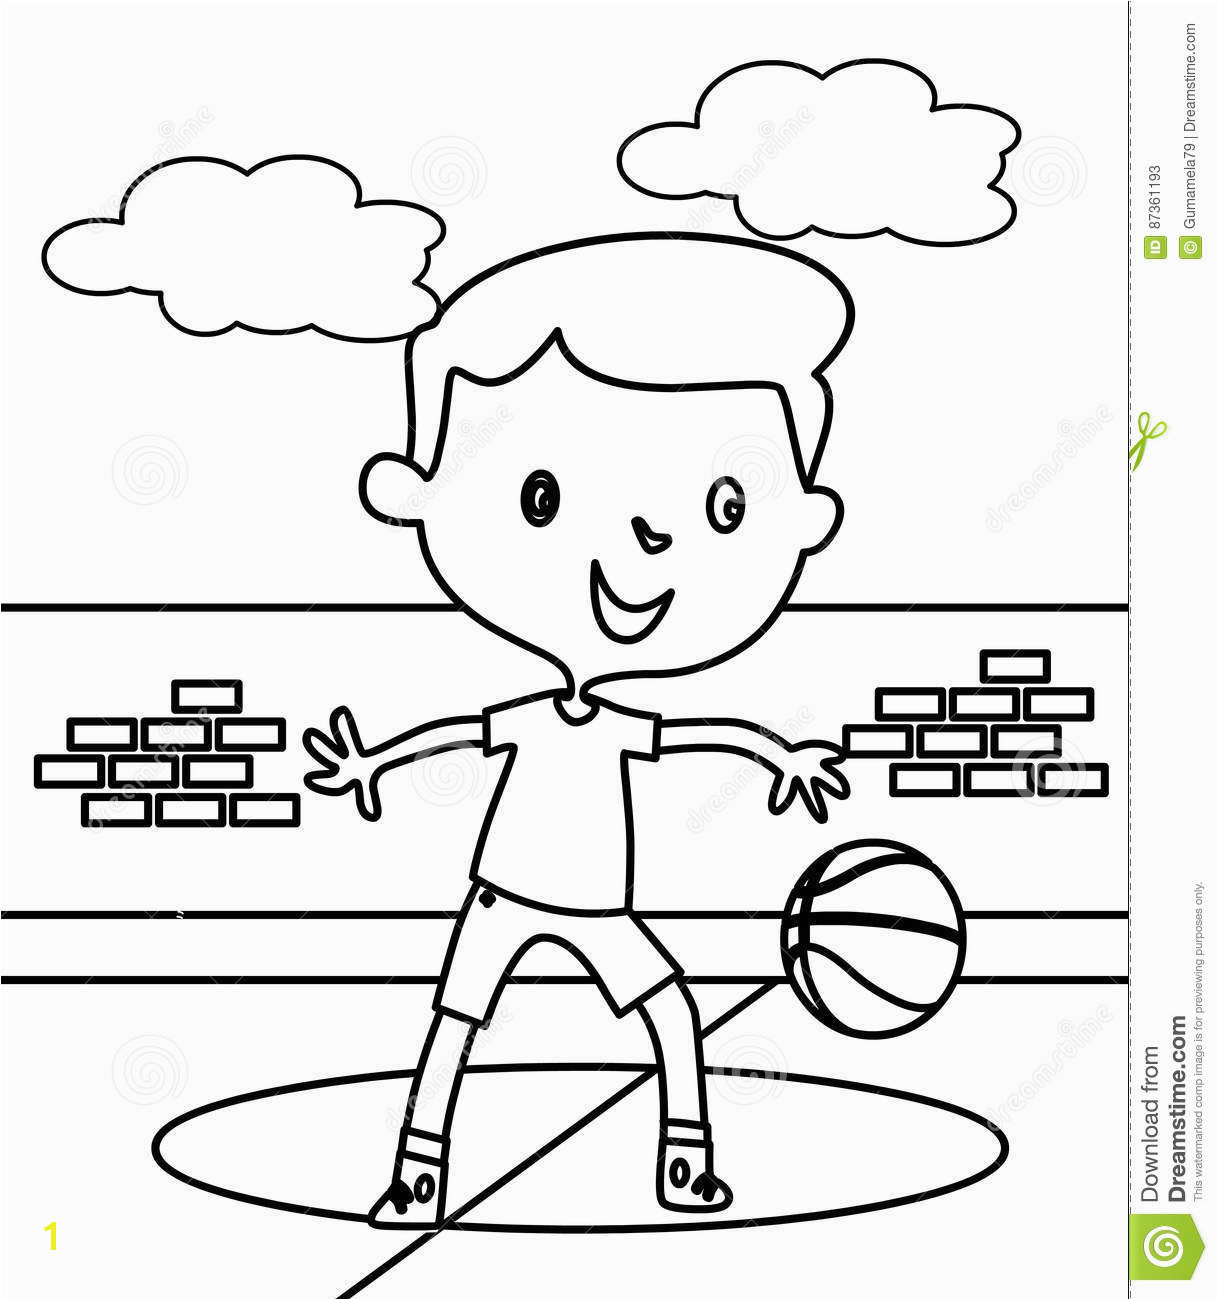 Little boy playing basketball coloring page